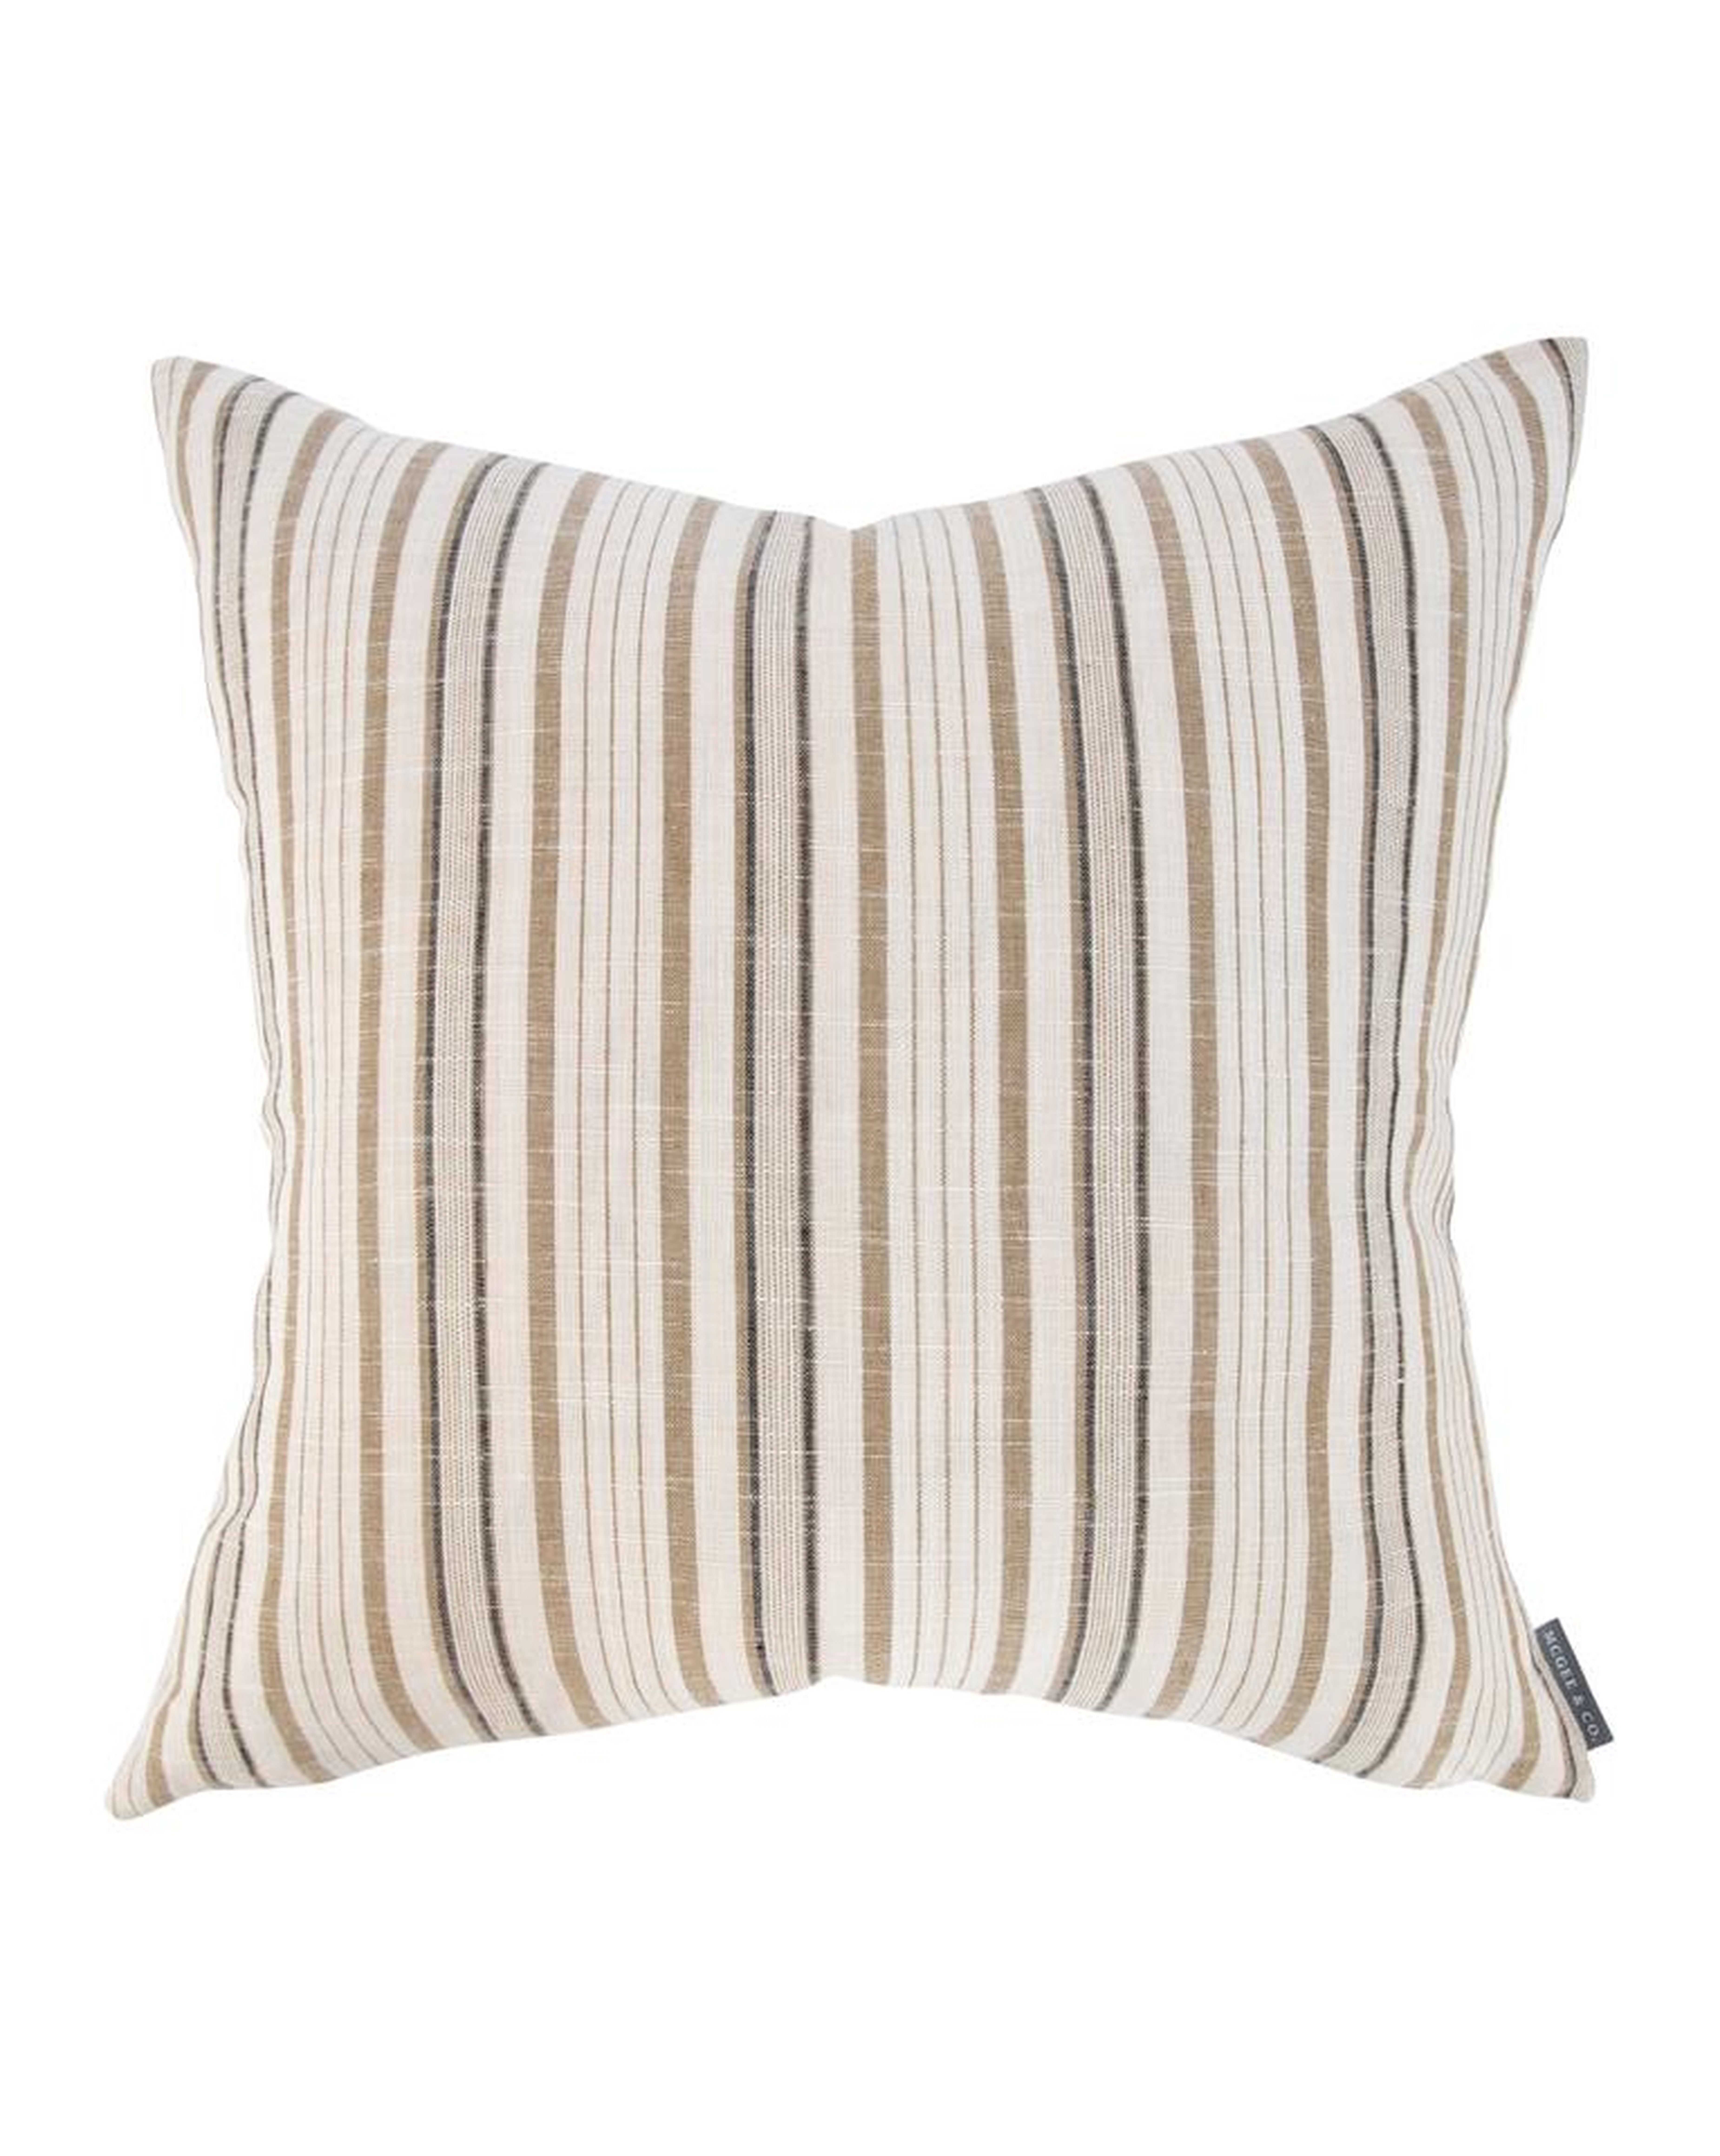 ARCHIE PILLOW COVER - McGee & Co.